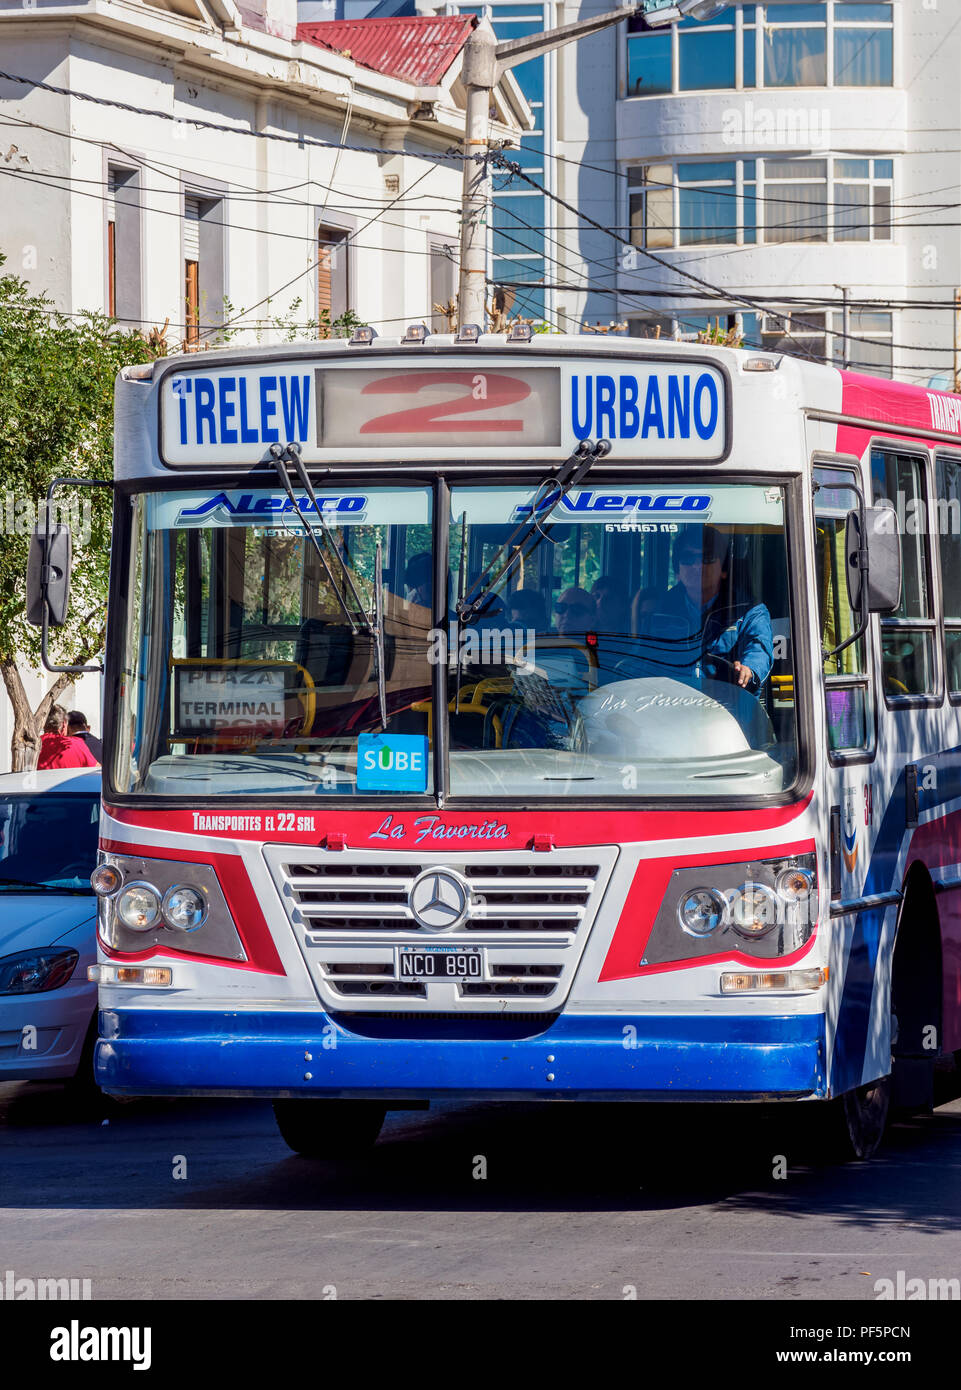 City Bus, Trelew, The Welsh Settlement, Chubut Province, Patagonia, Argentina Stock Photo